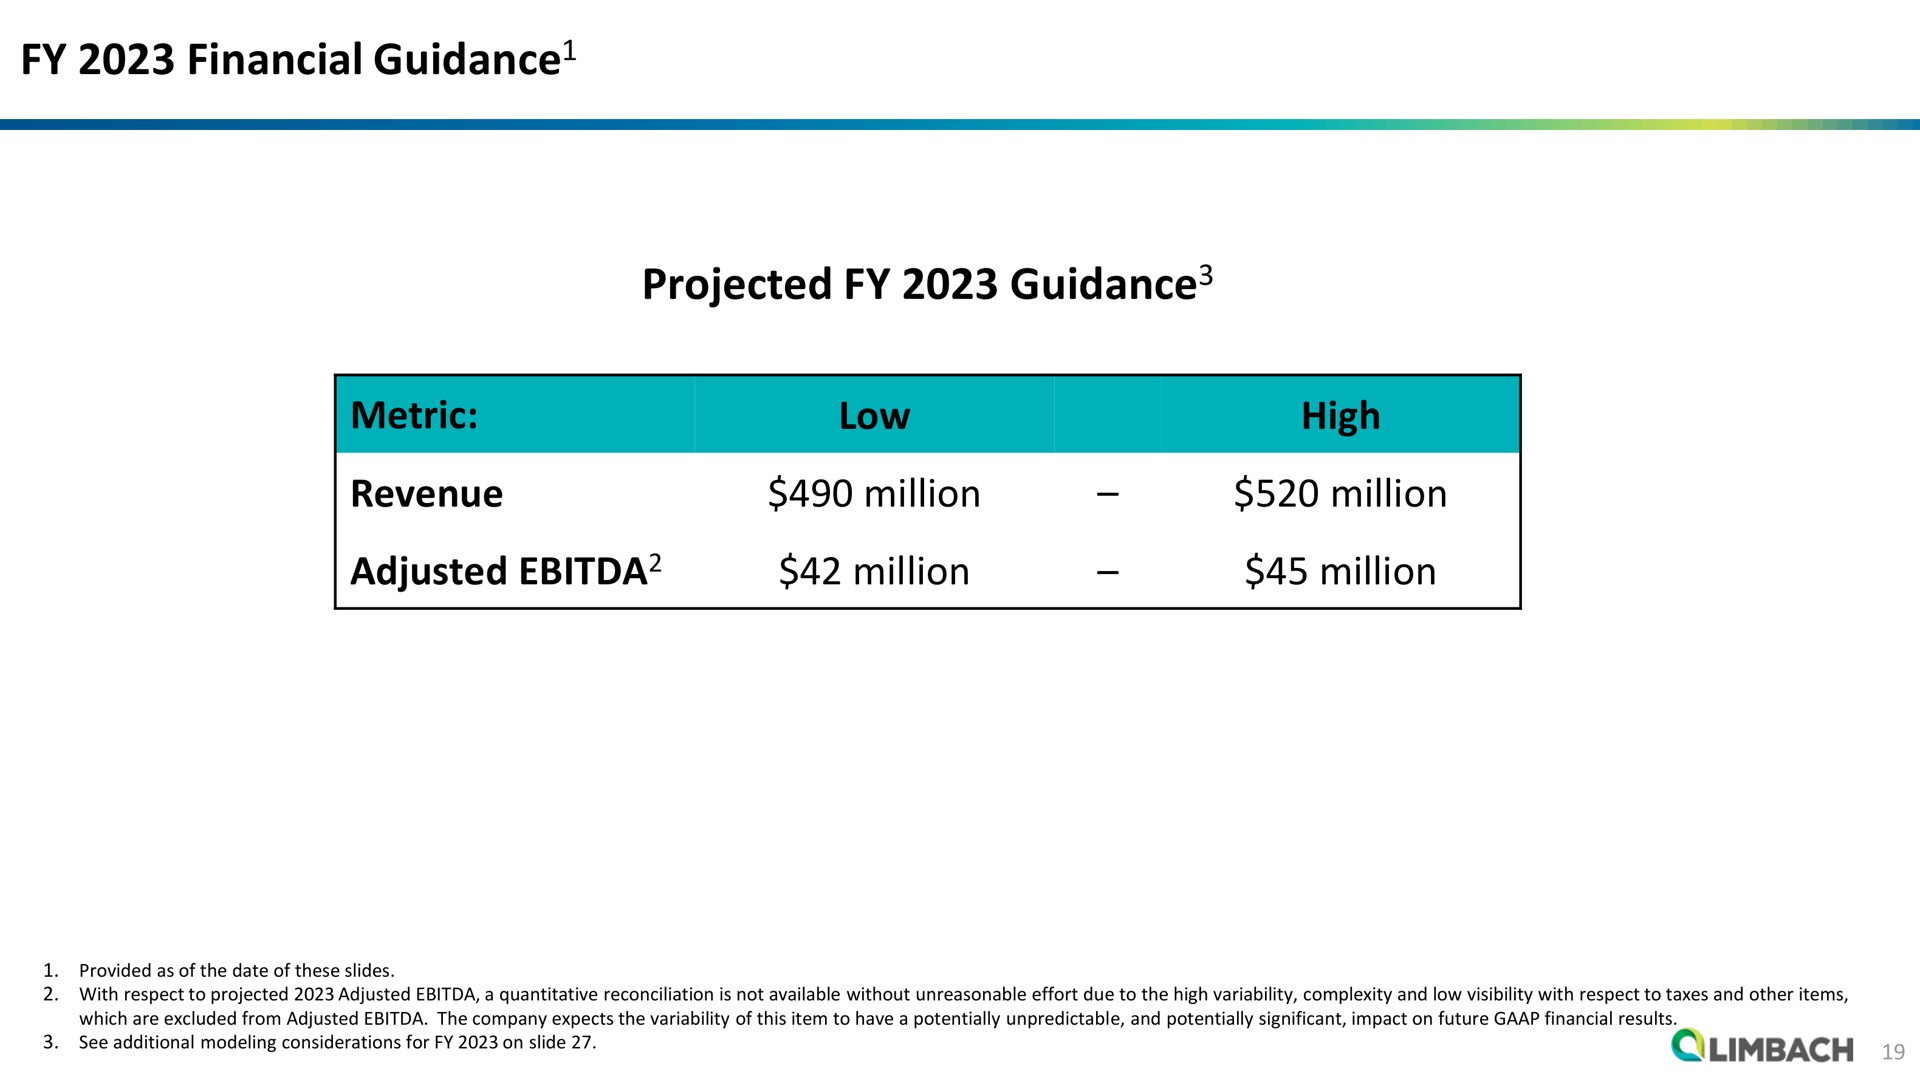 financial guidance projected guidance metric revenue low million adjusted million high million million guidance guidance | Limbach Holdings